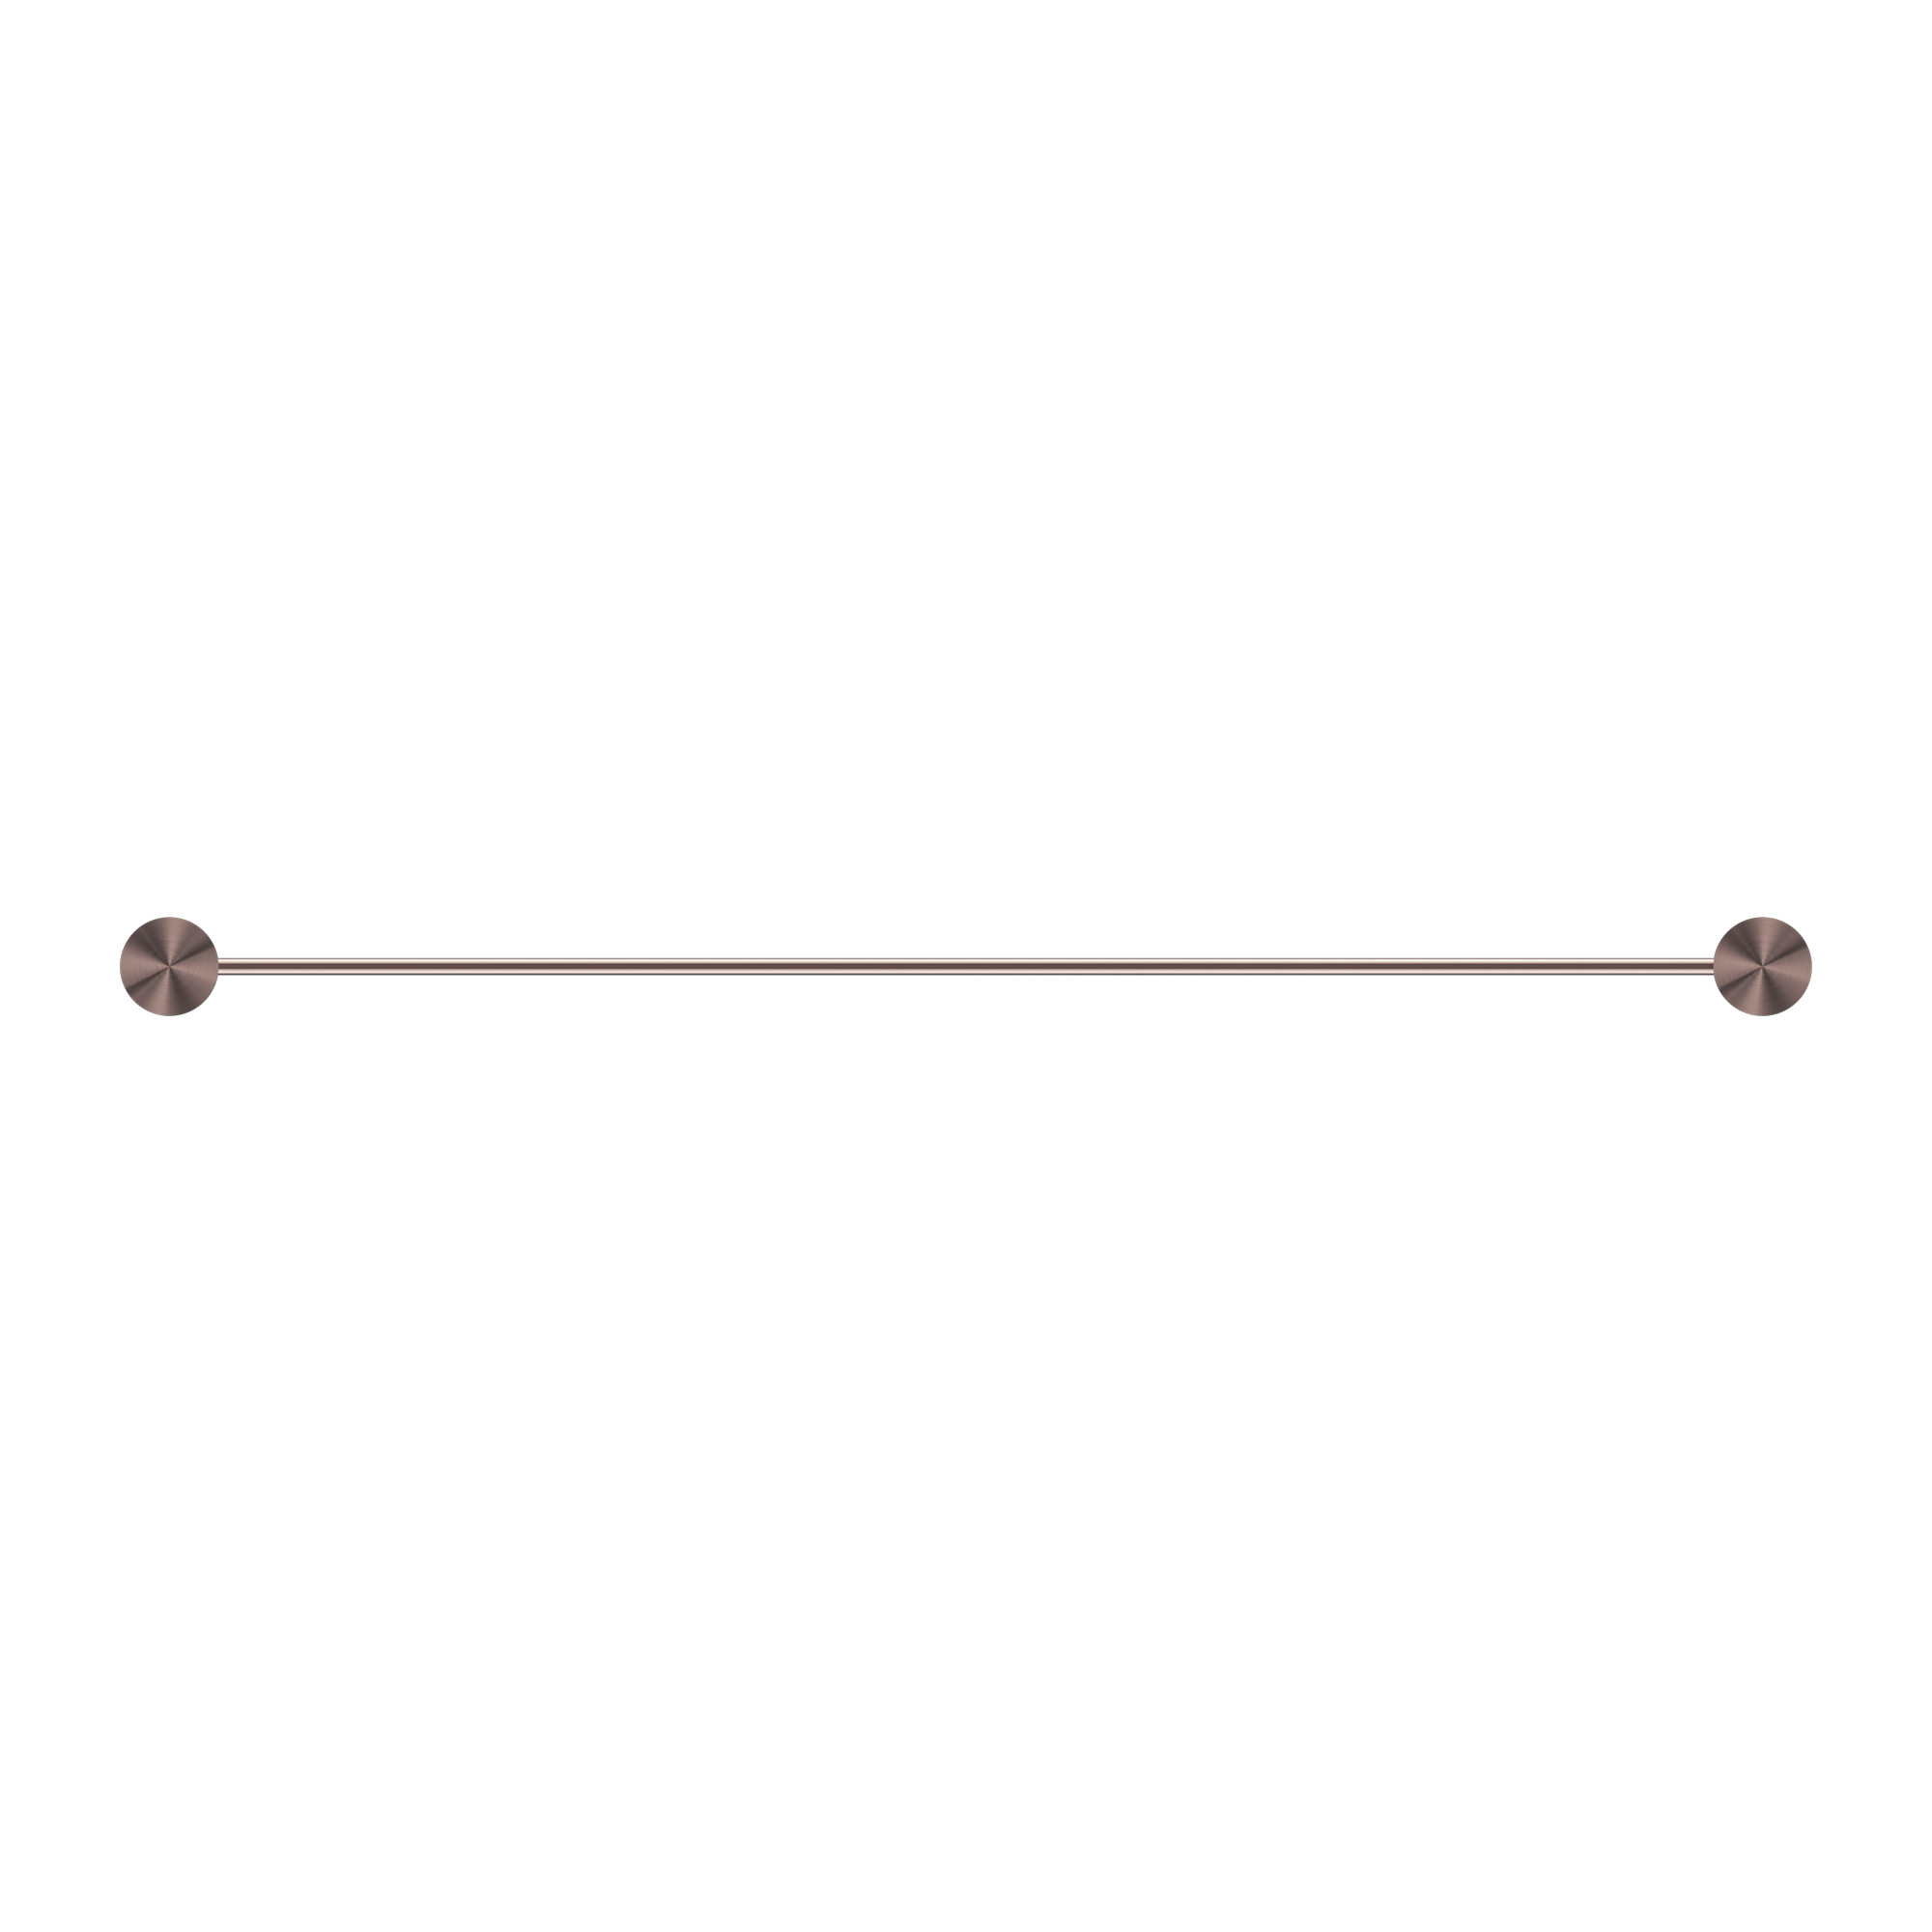 NERO OPAL NON-HEATED DOUBLE TOWEL RAIL BRUSHED BRONZE (AVAILABLE IN 600MM AND 800MM)